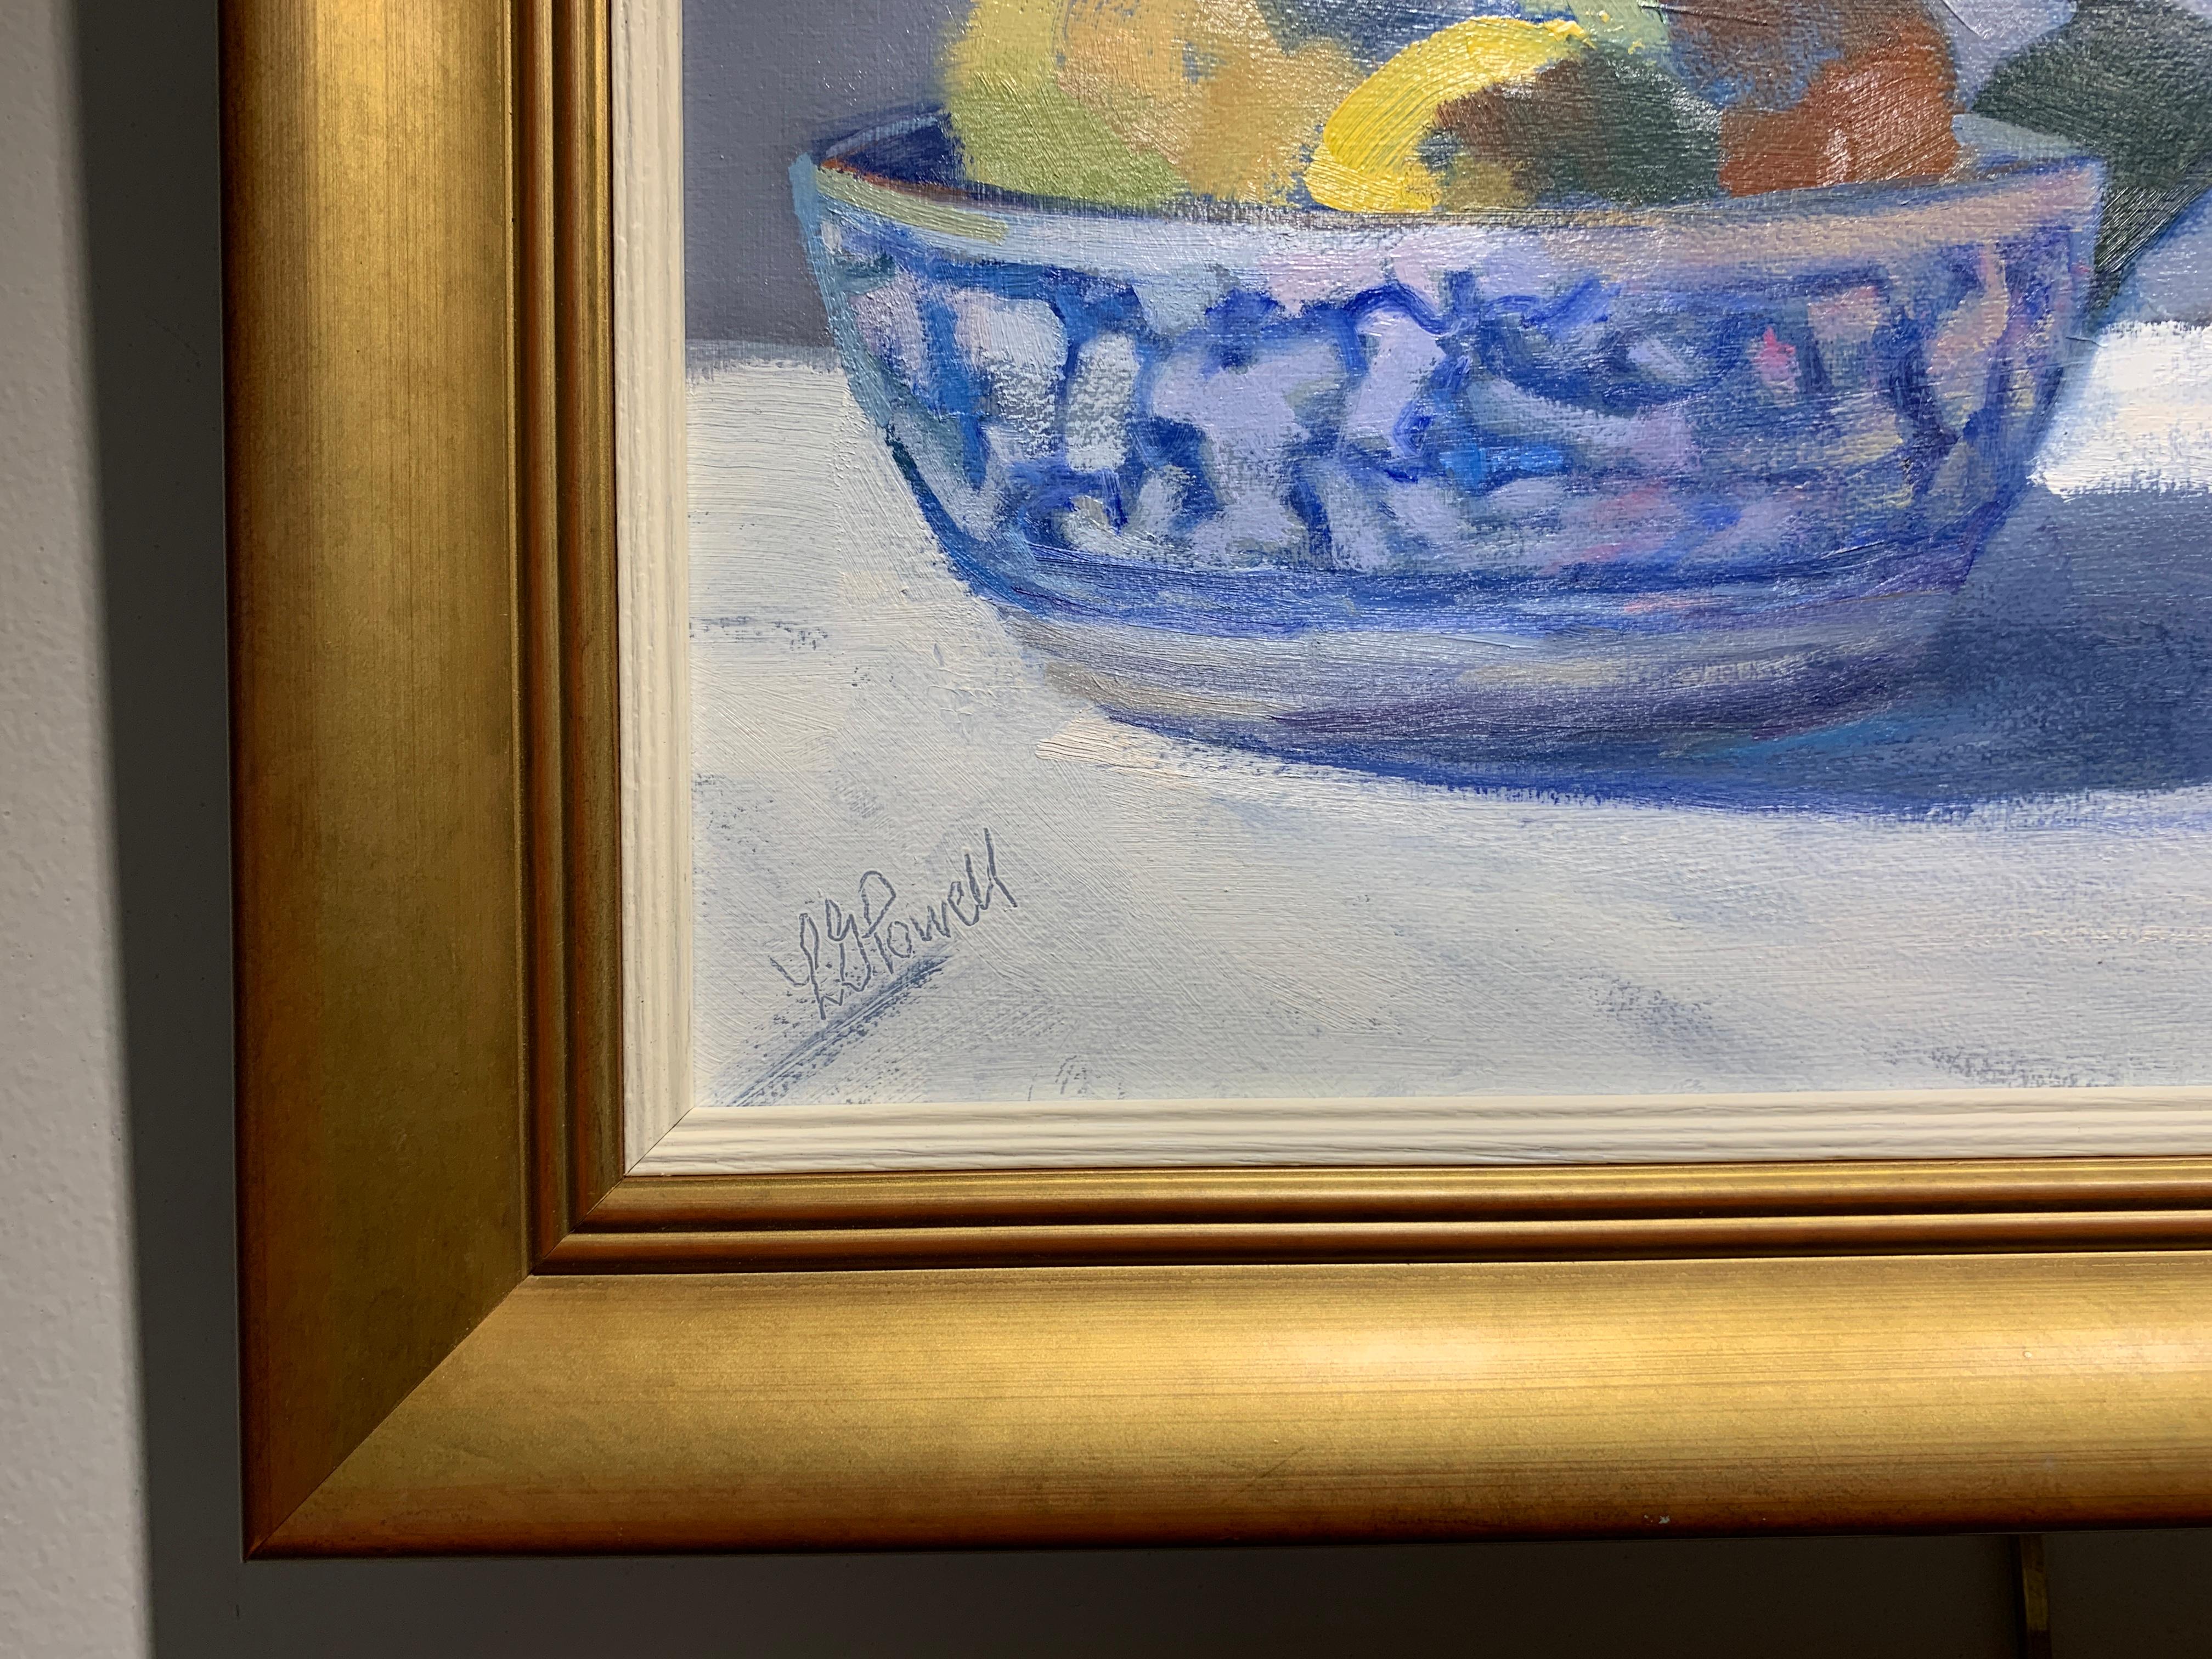 Fruit and Bowl by Lesley Powell, Small Framed Post-Impressionist Oil Painting 2